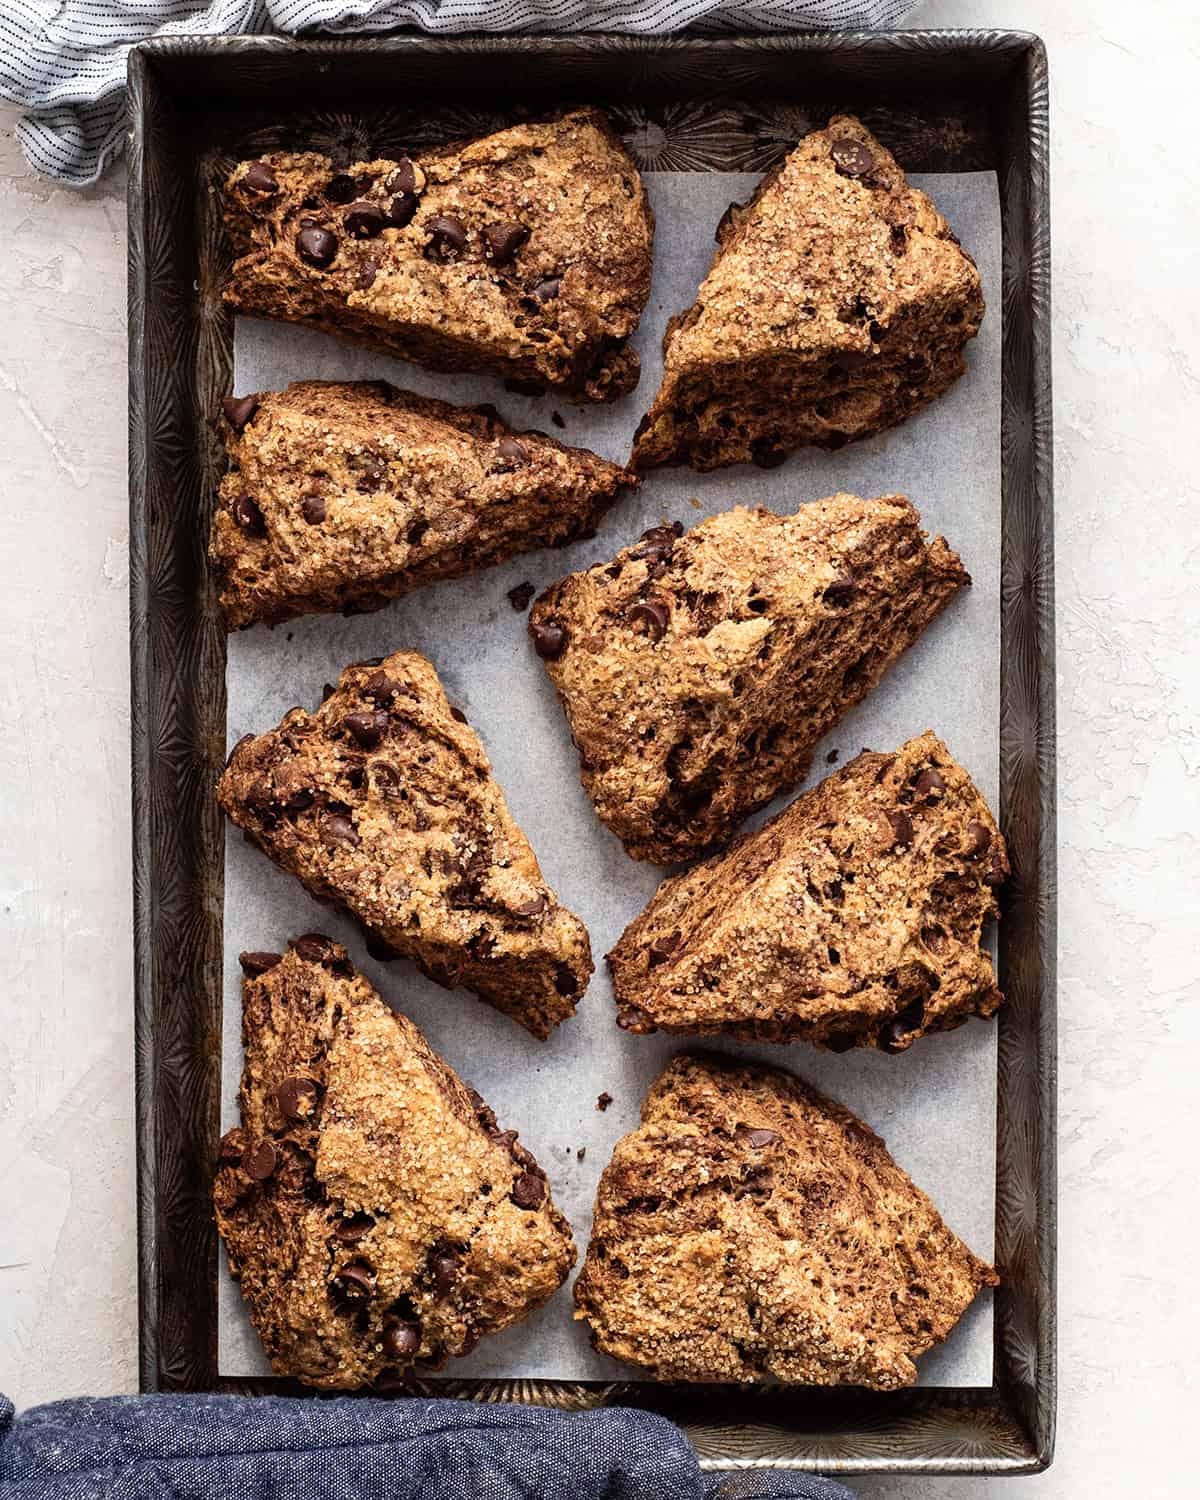 How to Make Chocolate Scones -on the baking sheet after baking